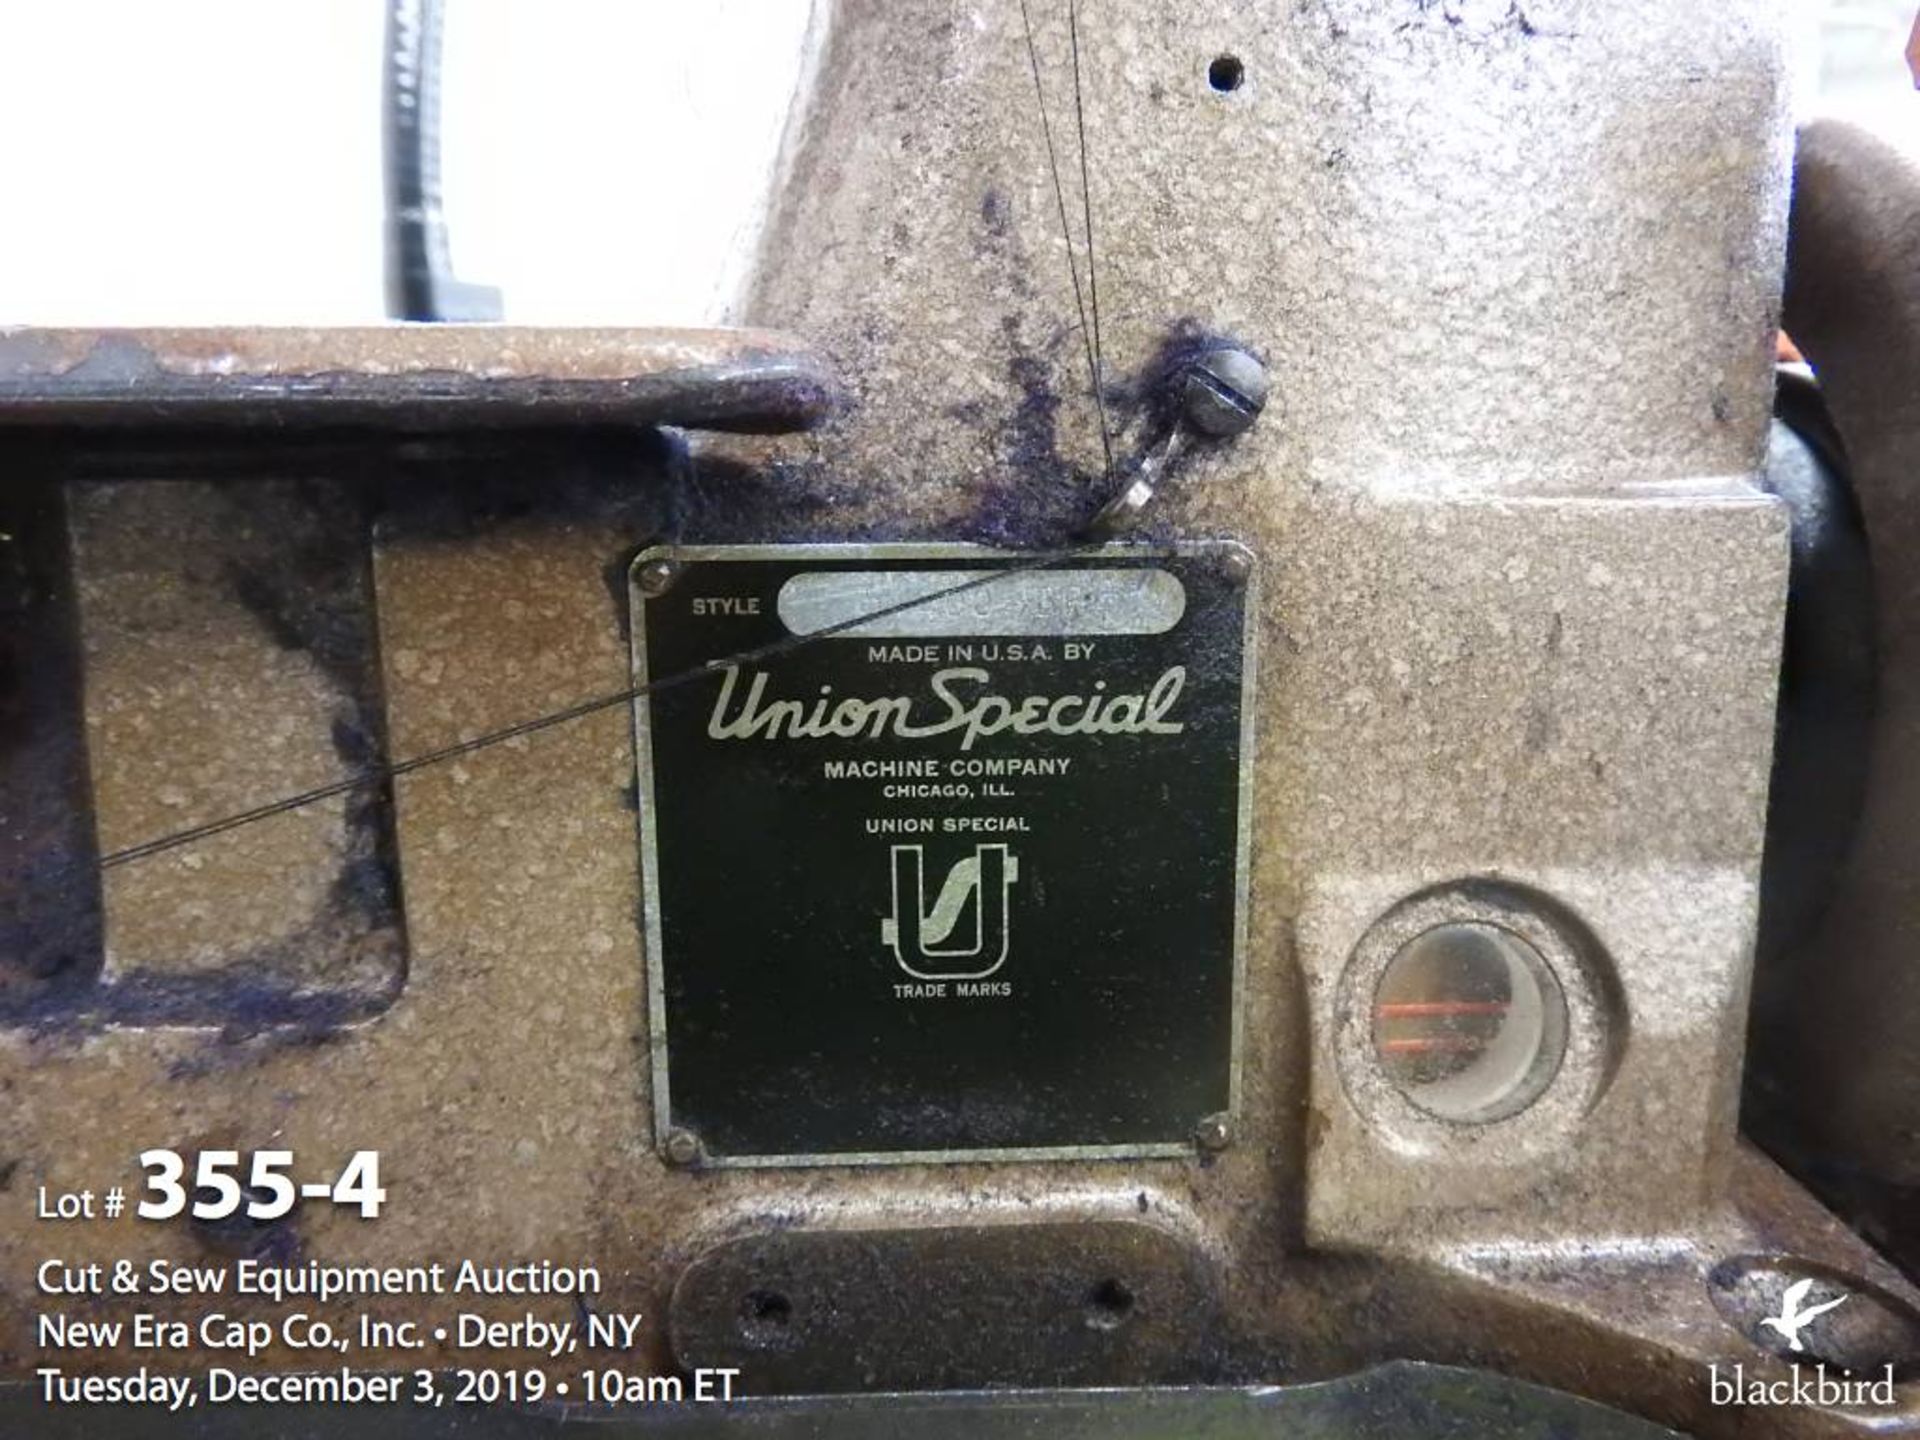 Union Special 51400BR Flat-bed double-needle, 4-thread plain feed chainstitch sewing machine - Image 4 of 4